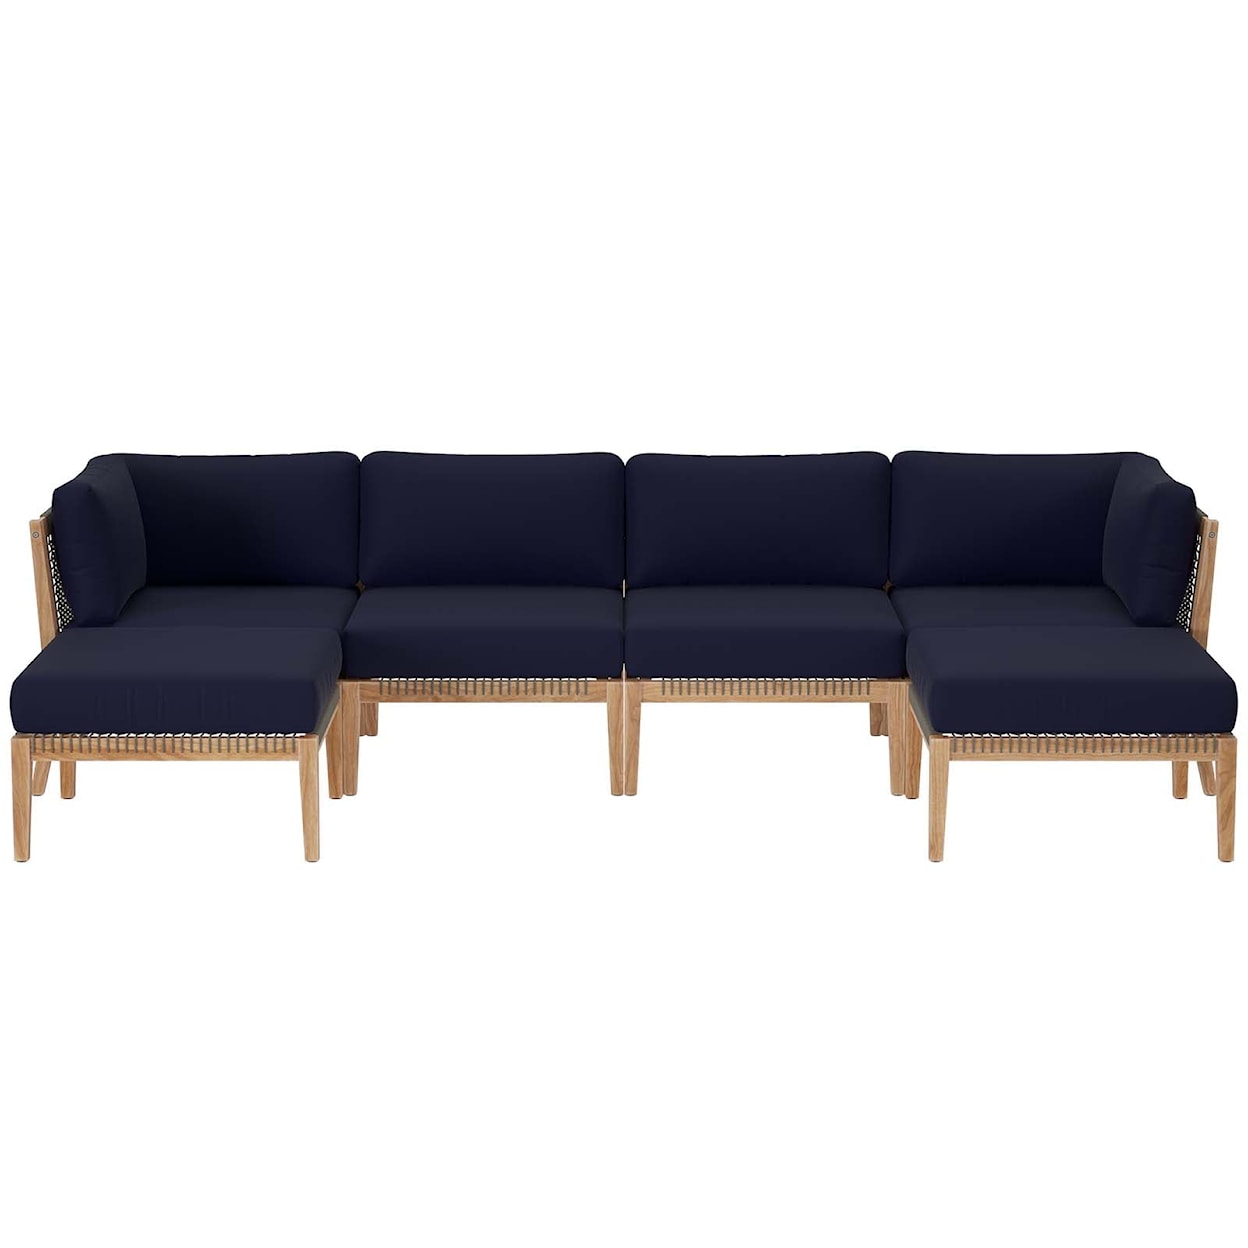 Modway Clearwater Outdoor Patio 6-Piece Sectional Sofa